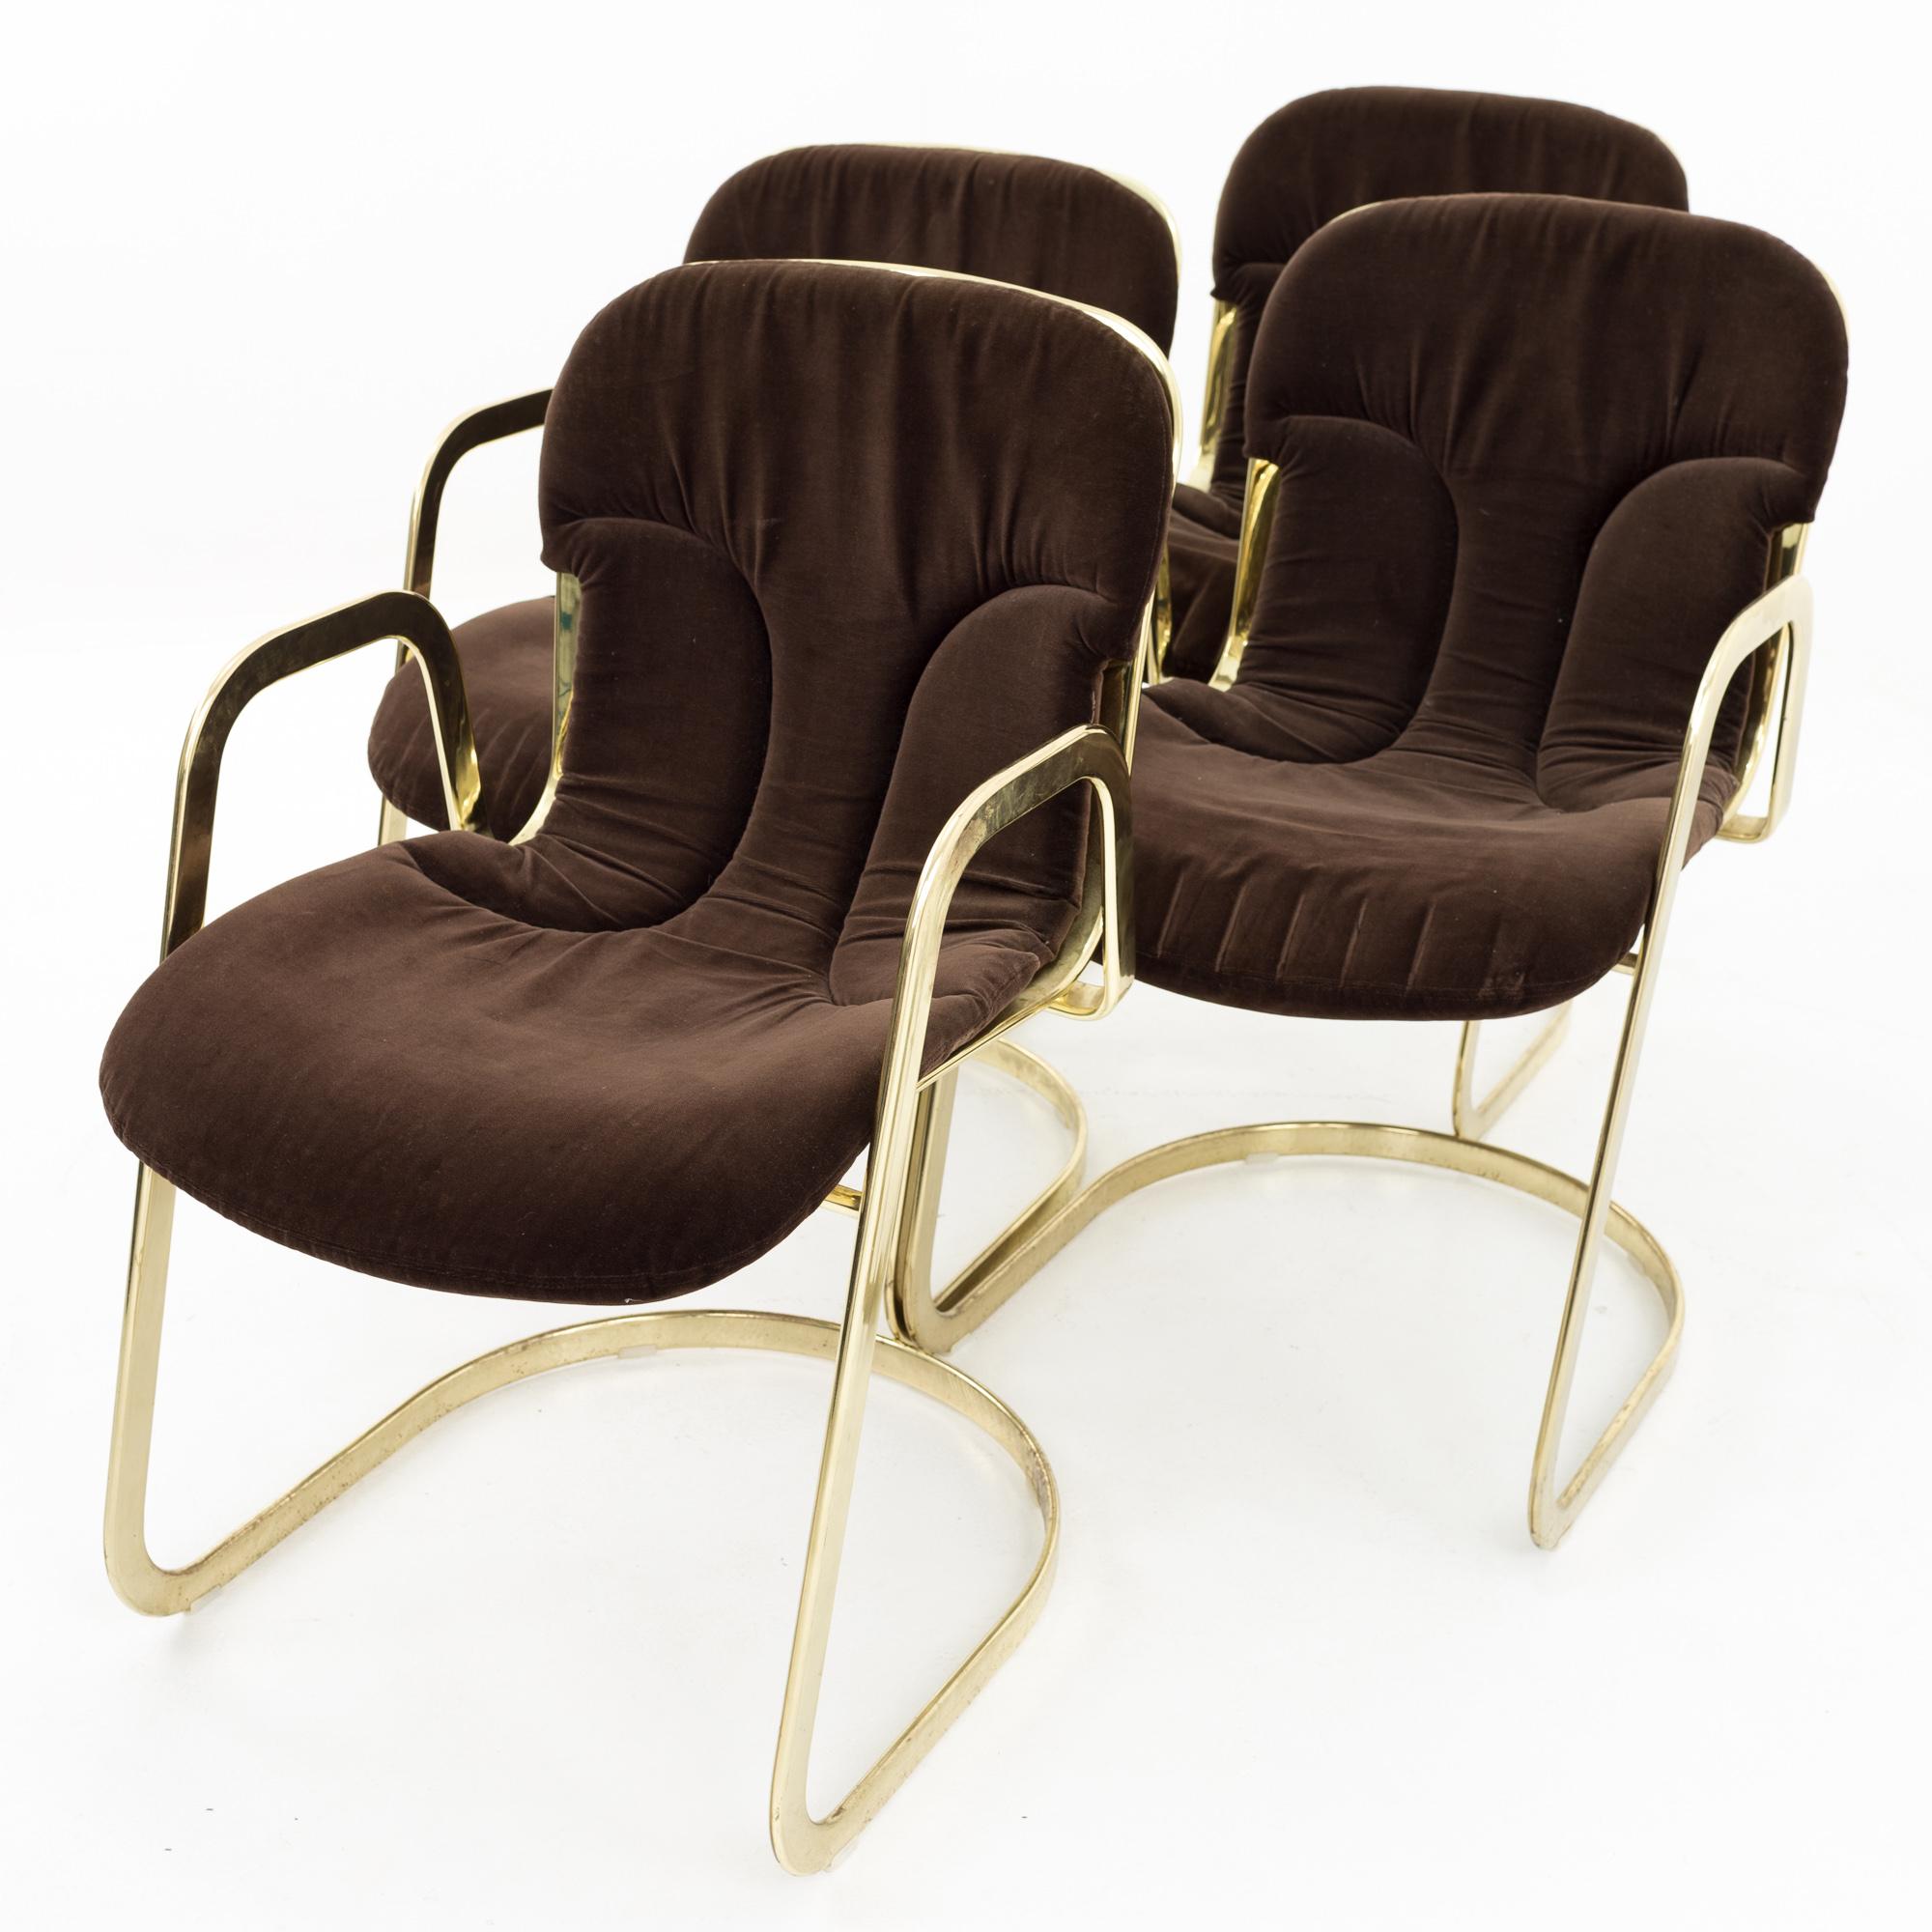 Willy Rizzo for Cidue mid century Italian brass cantilever chair - Set of 4
Each chair measures 19.5 wide x 23 deep x 32 high with a seat height of 18 inches and an arm height of 25 inches

All pieces of furniture can be had in what we call